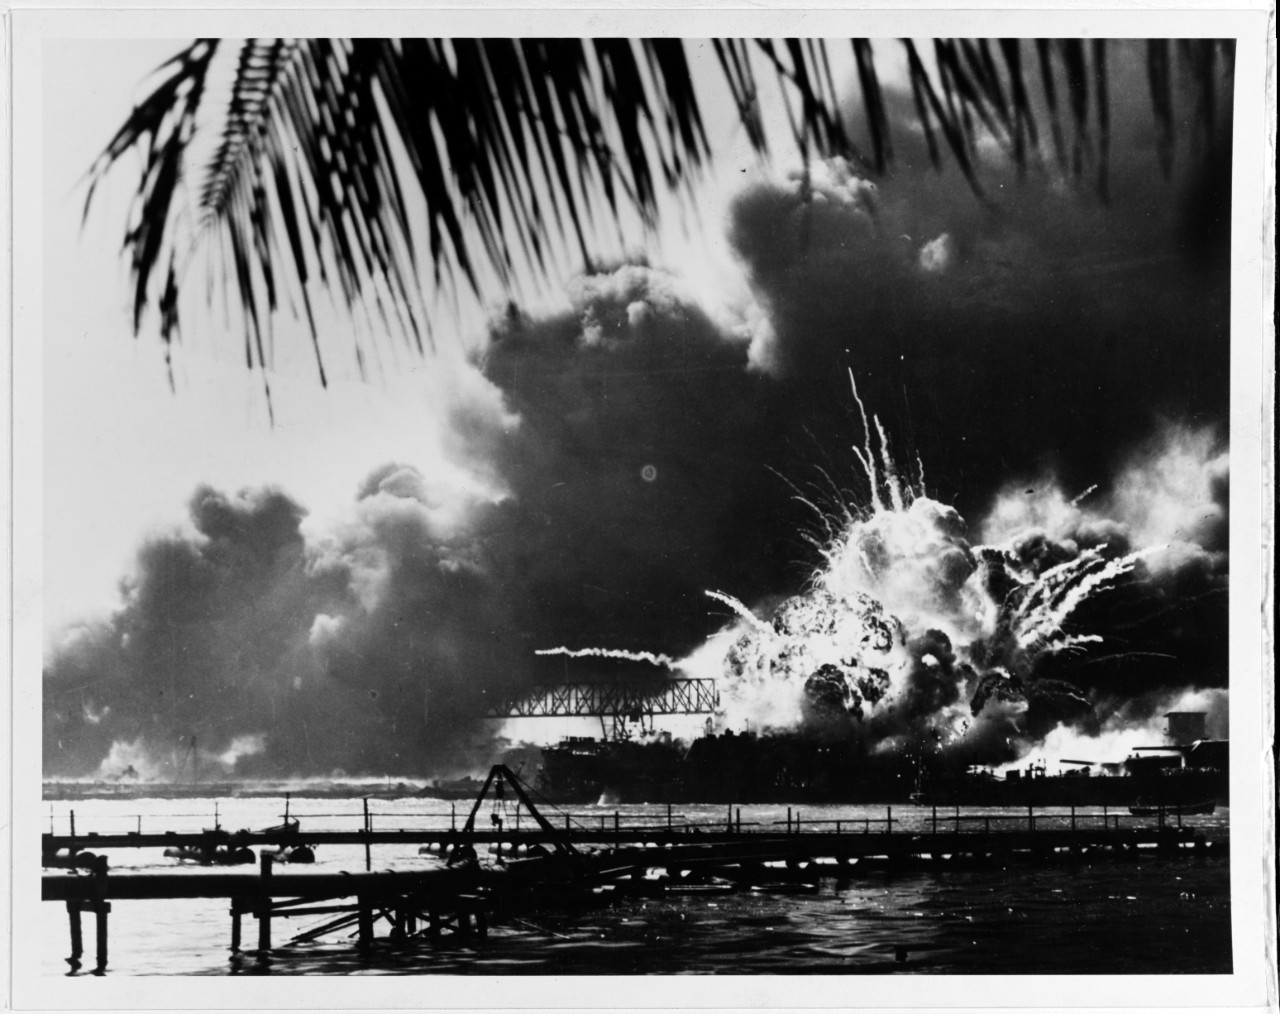 The forward magazine of USS Shaw explodes during the second Japanese attack wave. (Naval History and Heritage Command)